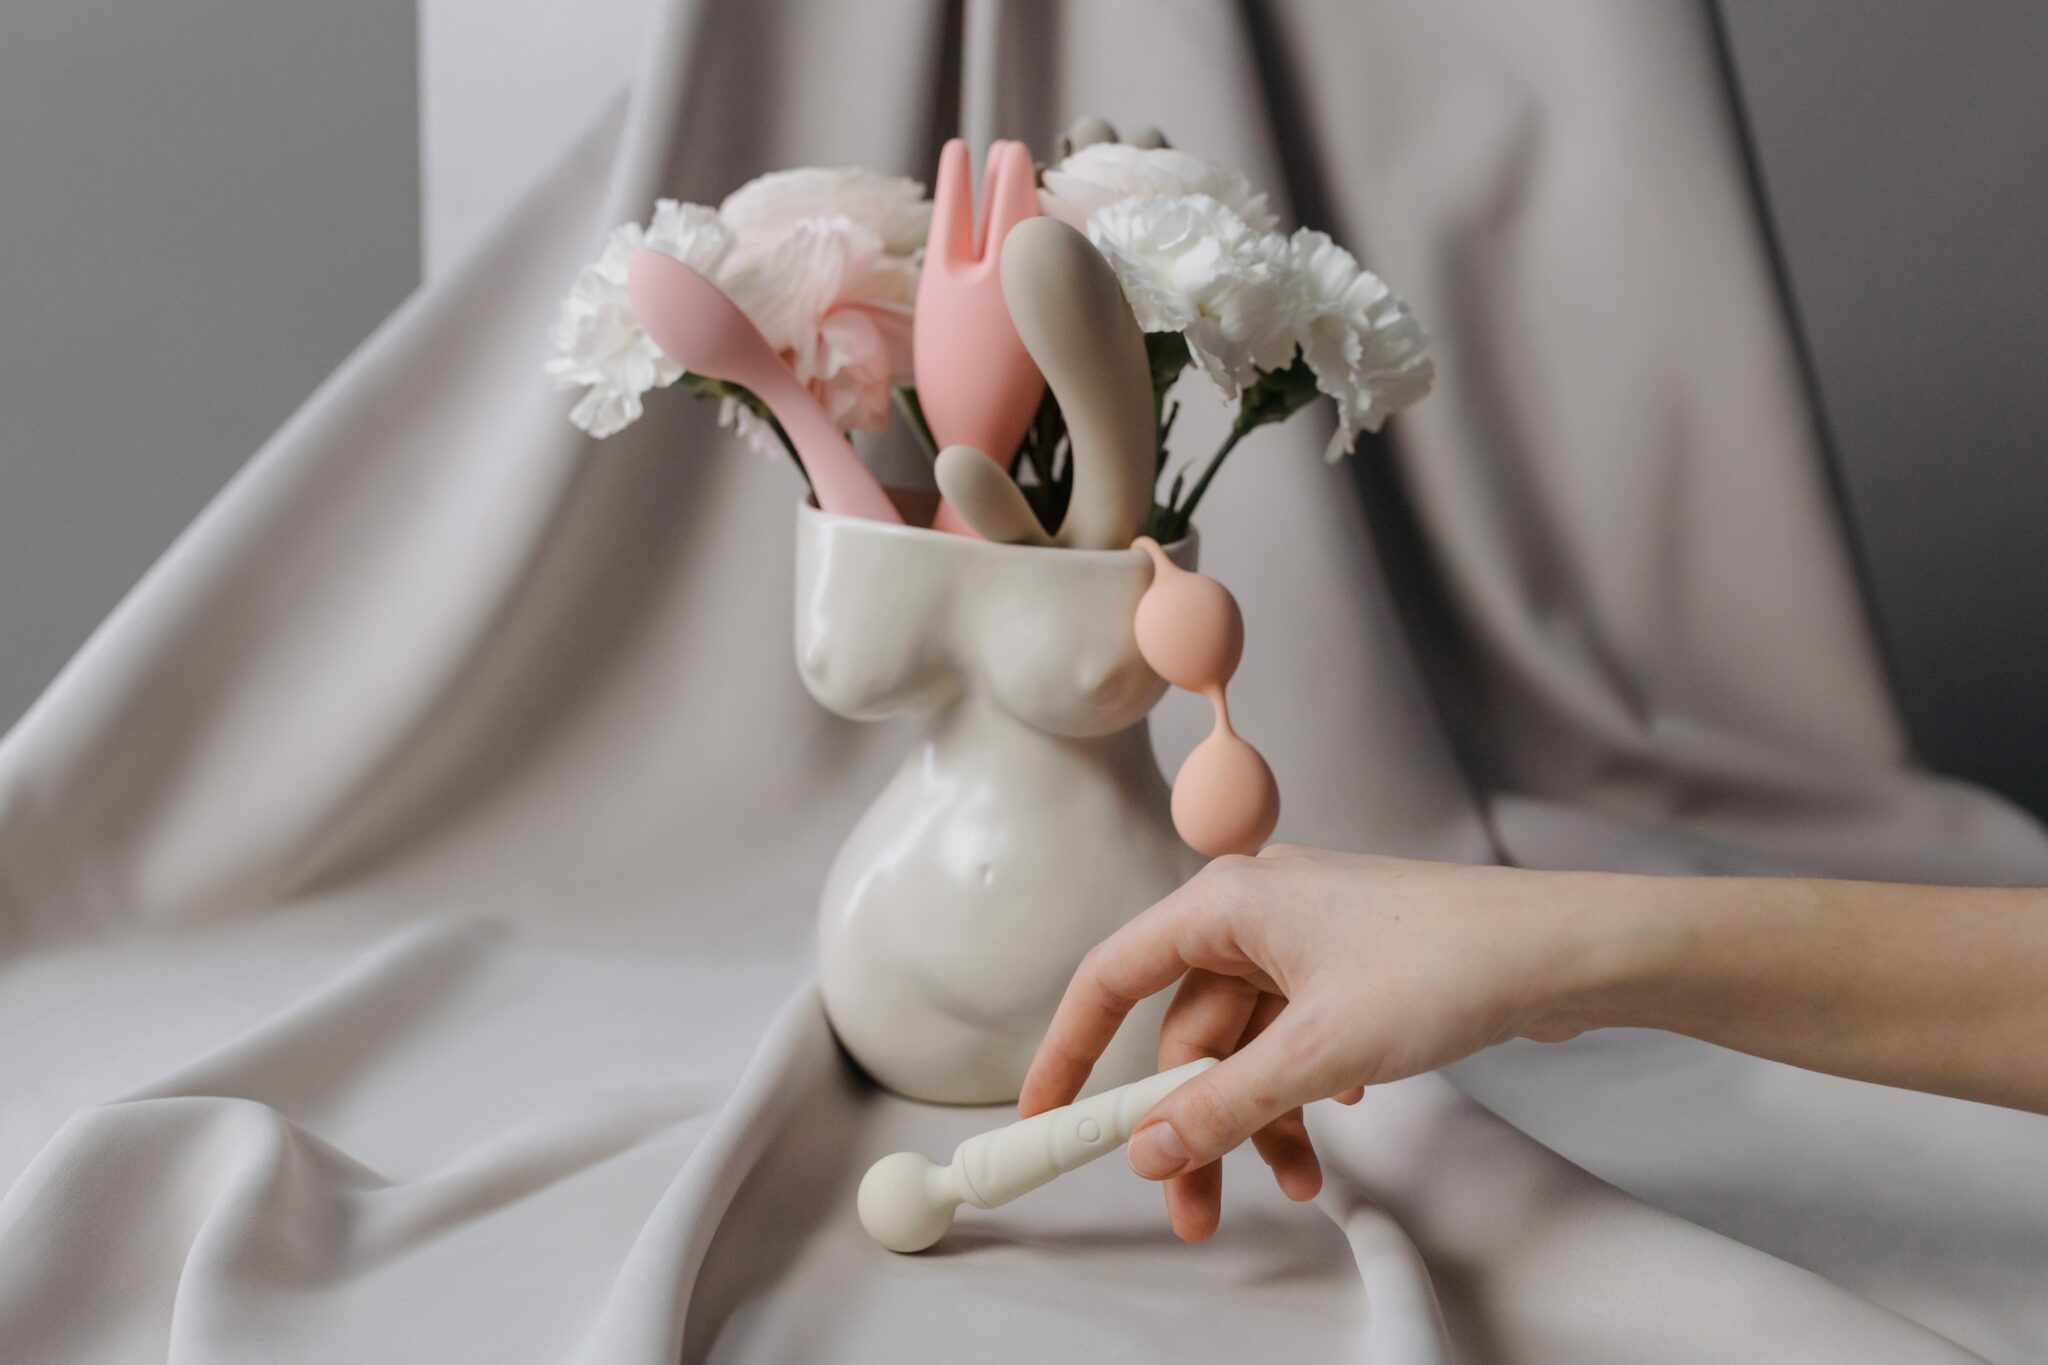 Valentine's day gift ideas, pastel sex toys in a flower vase shaped like a woman's body.